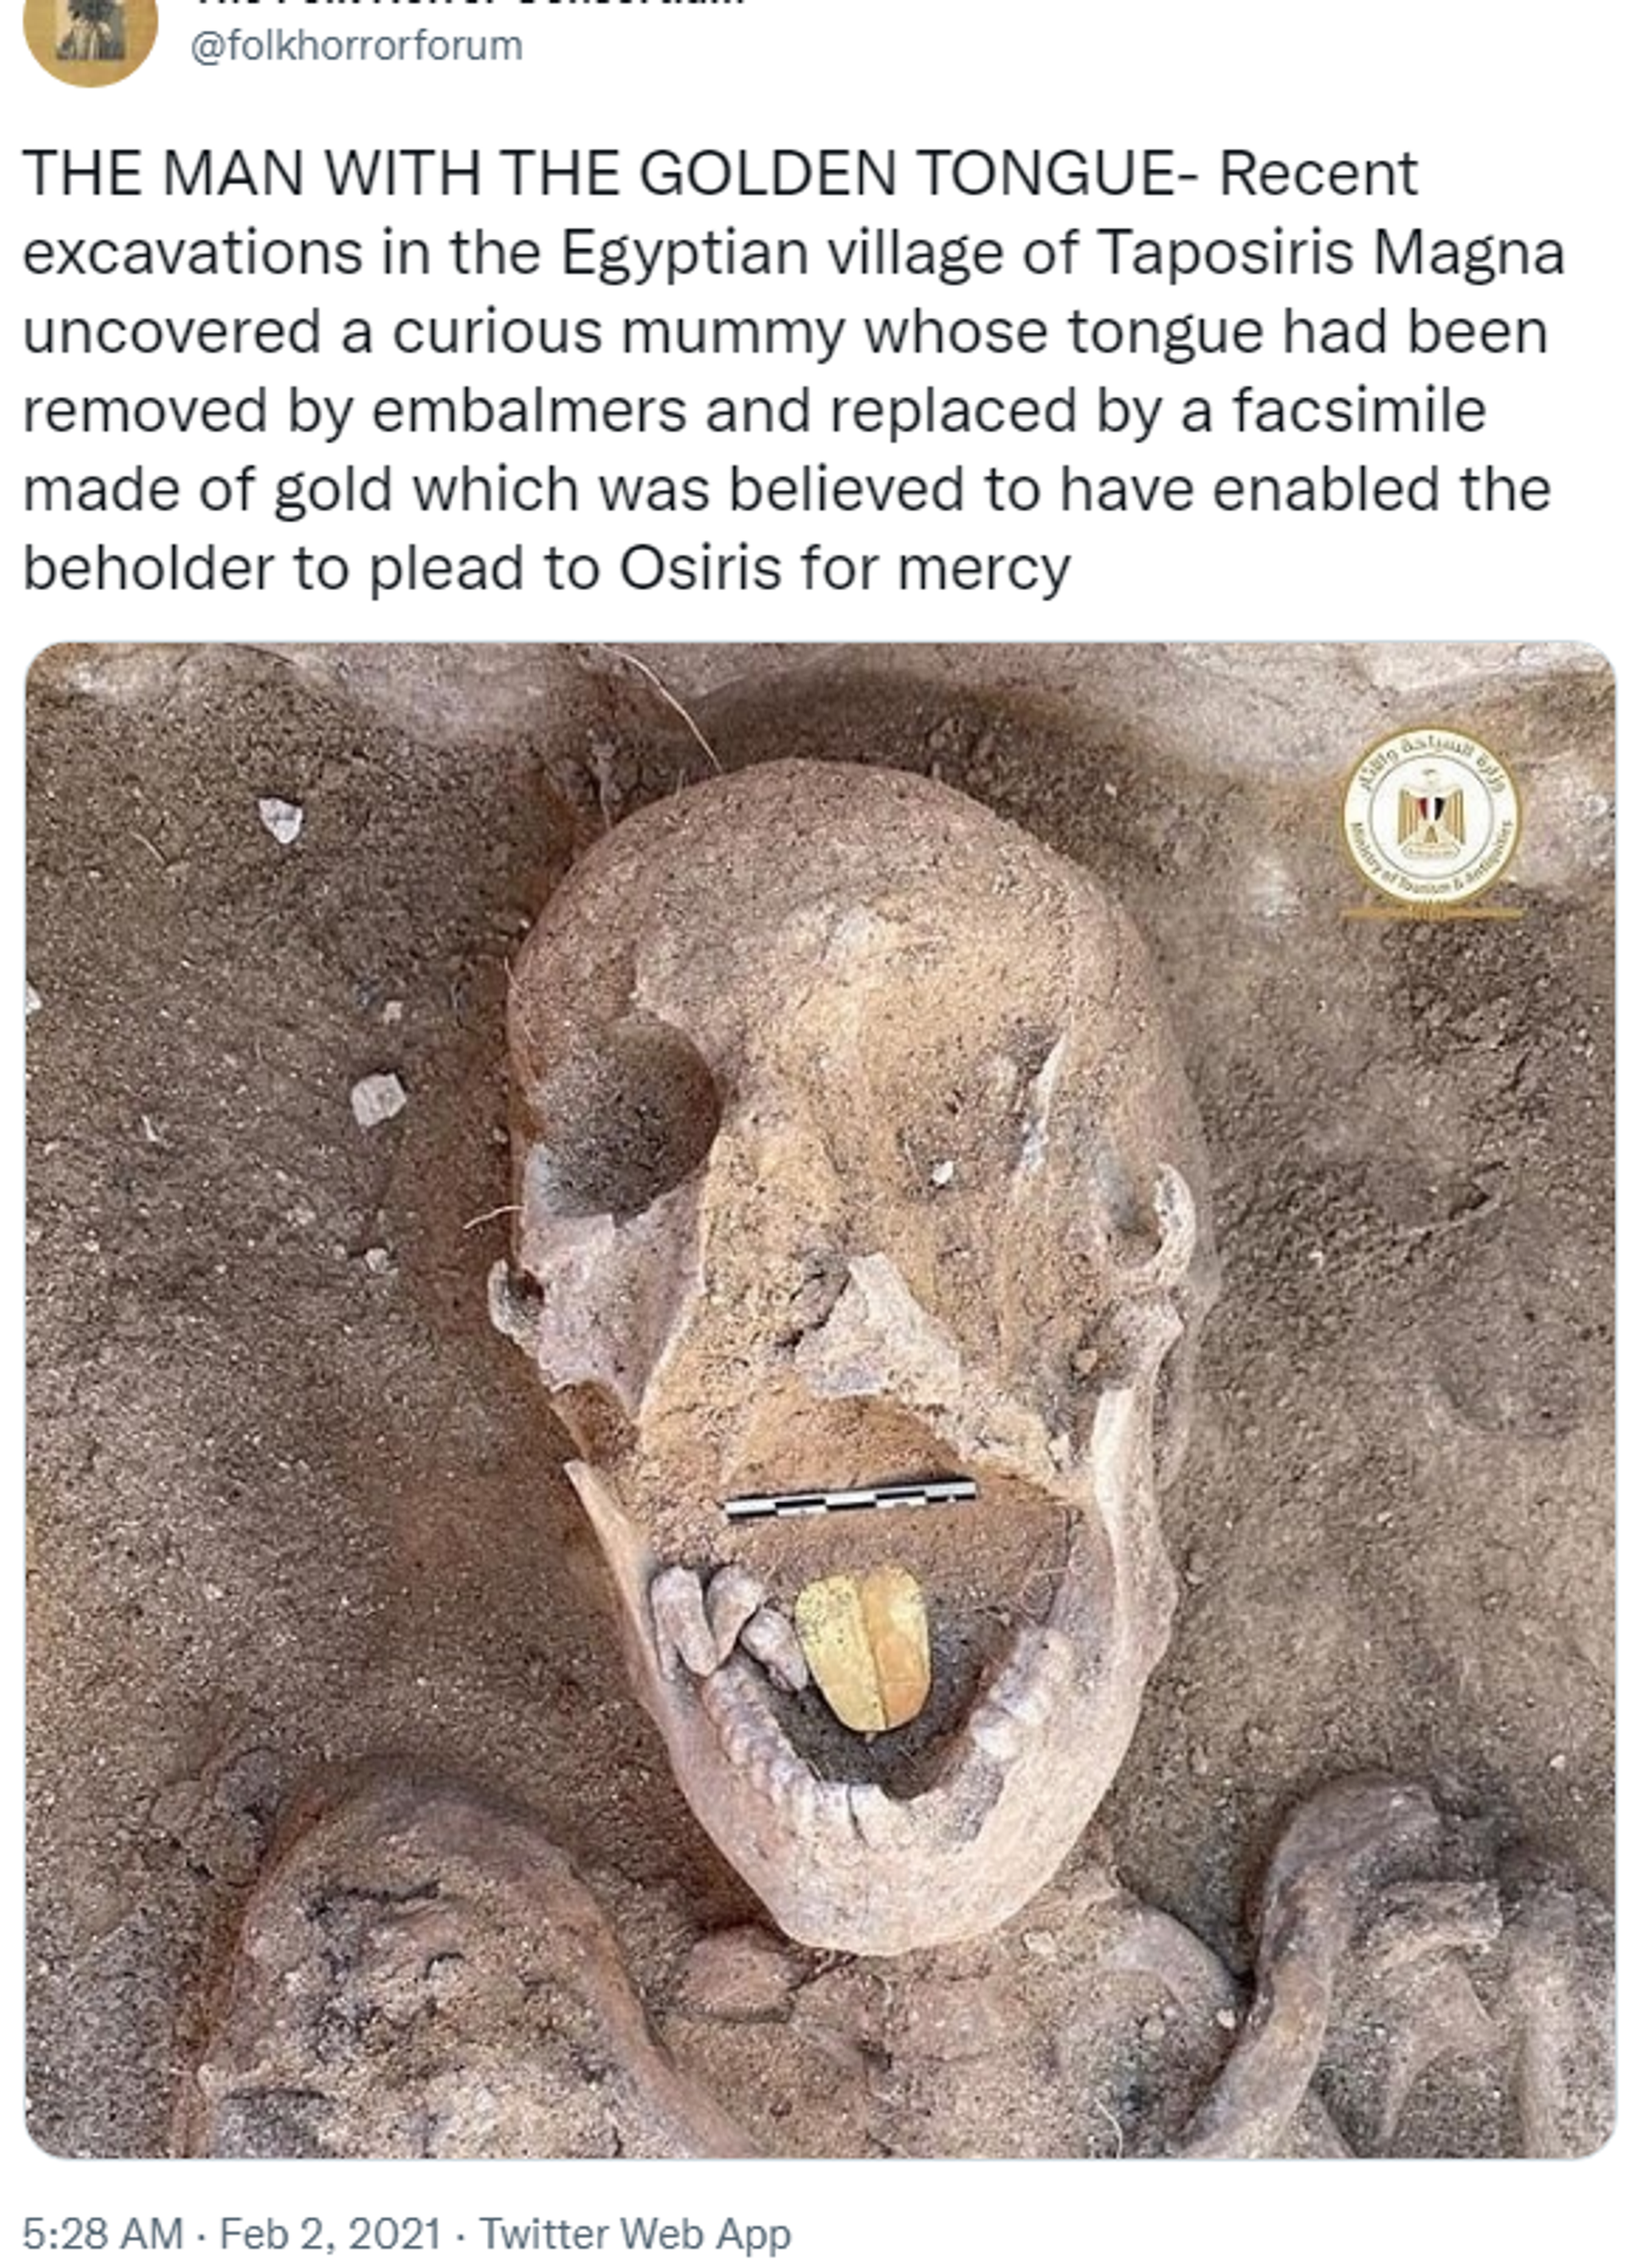 Twitter screenshot featuring image of mummy with golden tongue found at Taposiris Magna released by Egypt's Ministry of Tourism and Antiquities in 2021. - Sputnik International, 1920, 26.11.2022